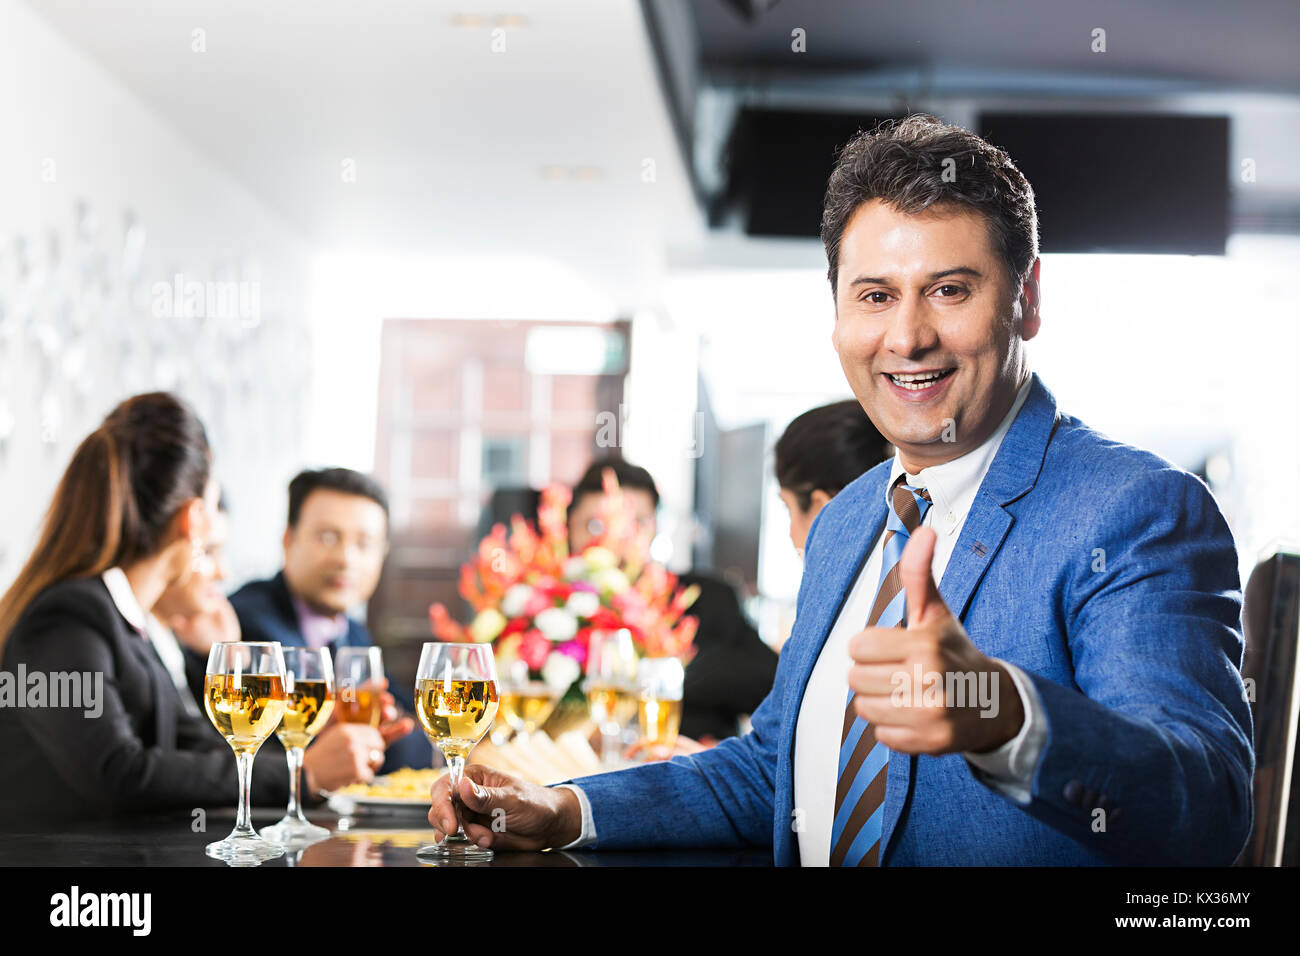 Group Business man Showing Thumbs-up with colleagues Restaurant Party Celebrating Stock Photo